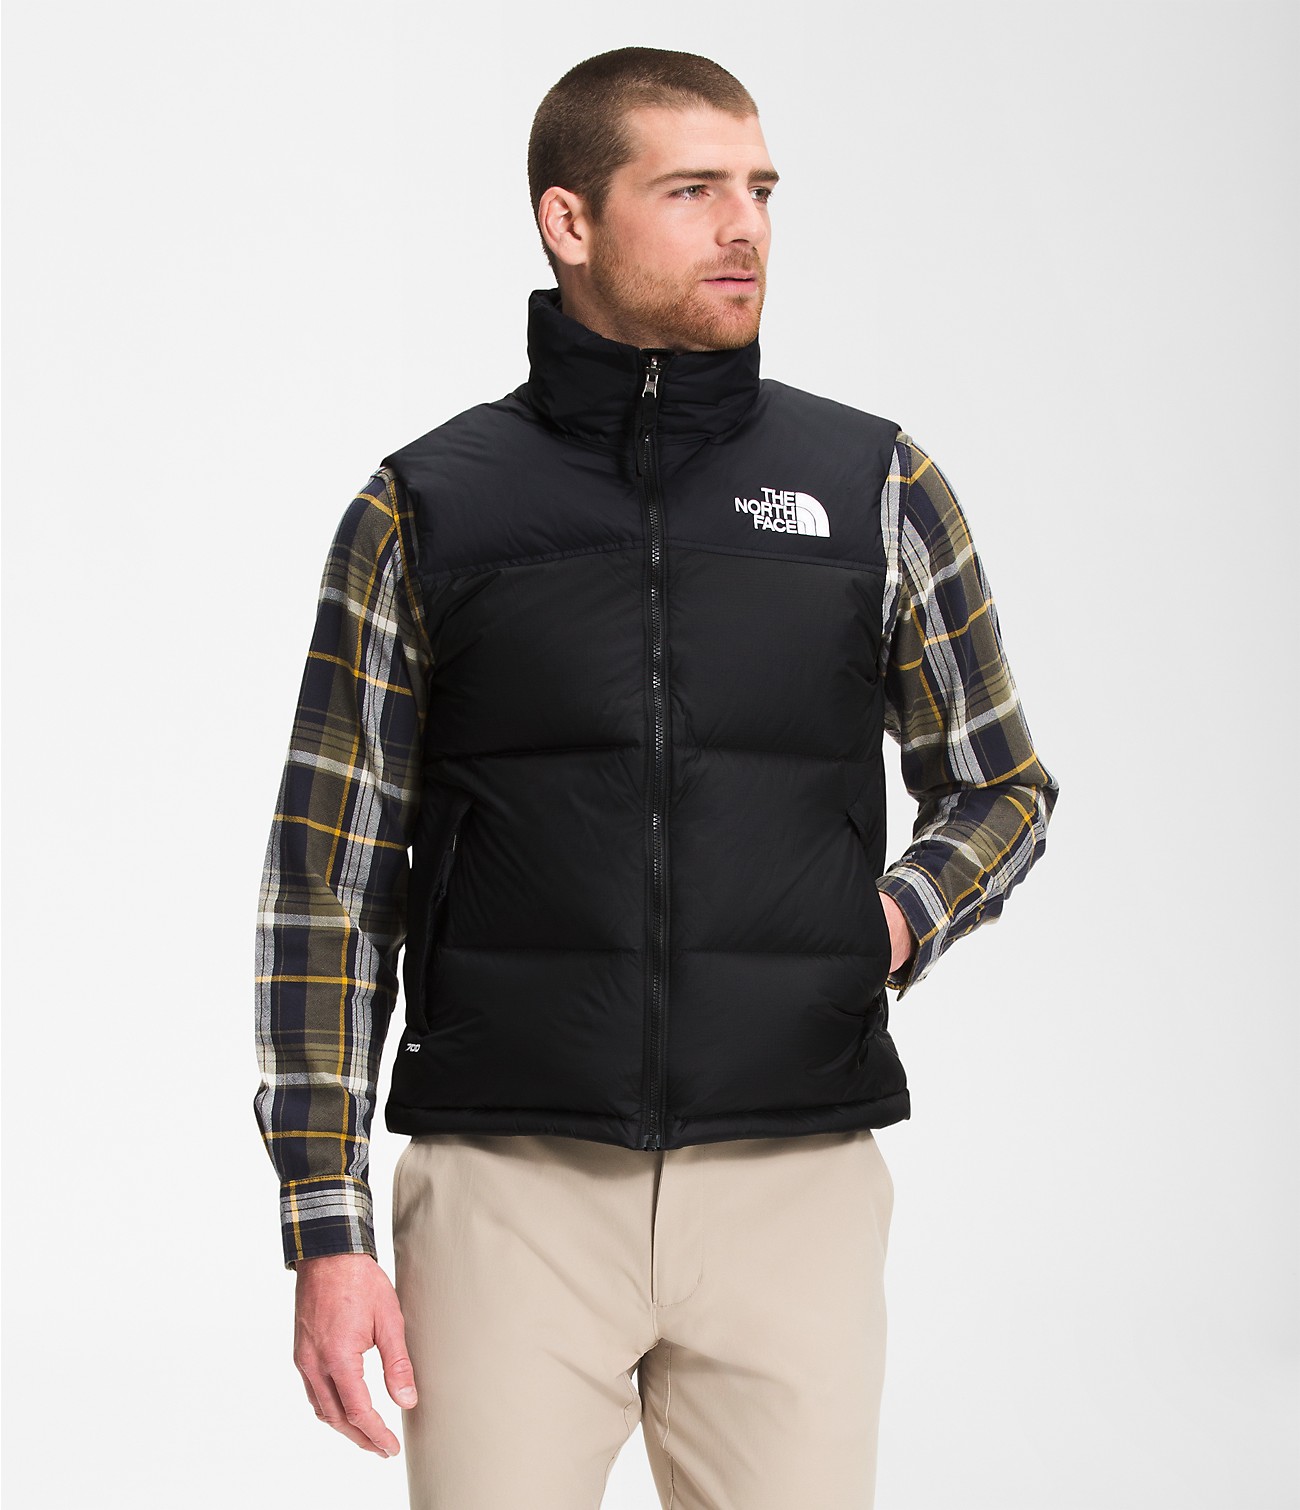 Unlock Wilderness' choice in the Lululemon Vs North Face comparison, the 1996 Retro Nuptse Vest by The North Face